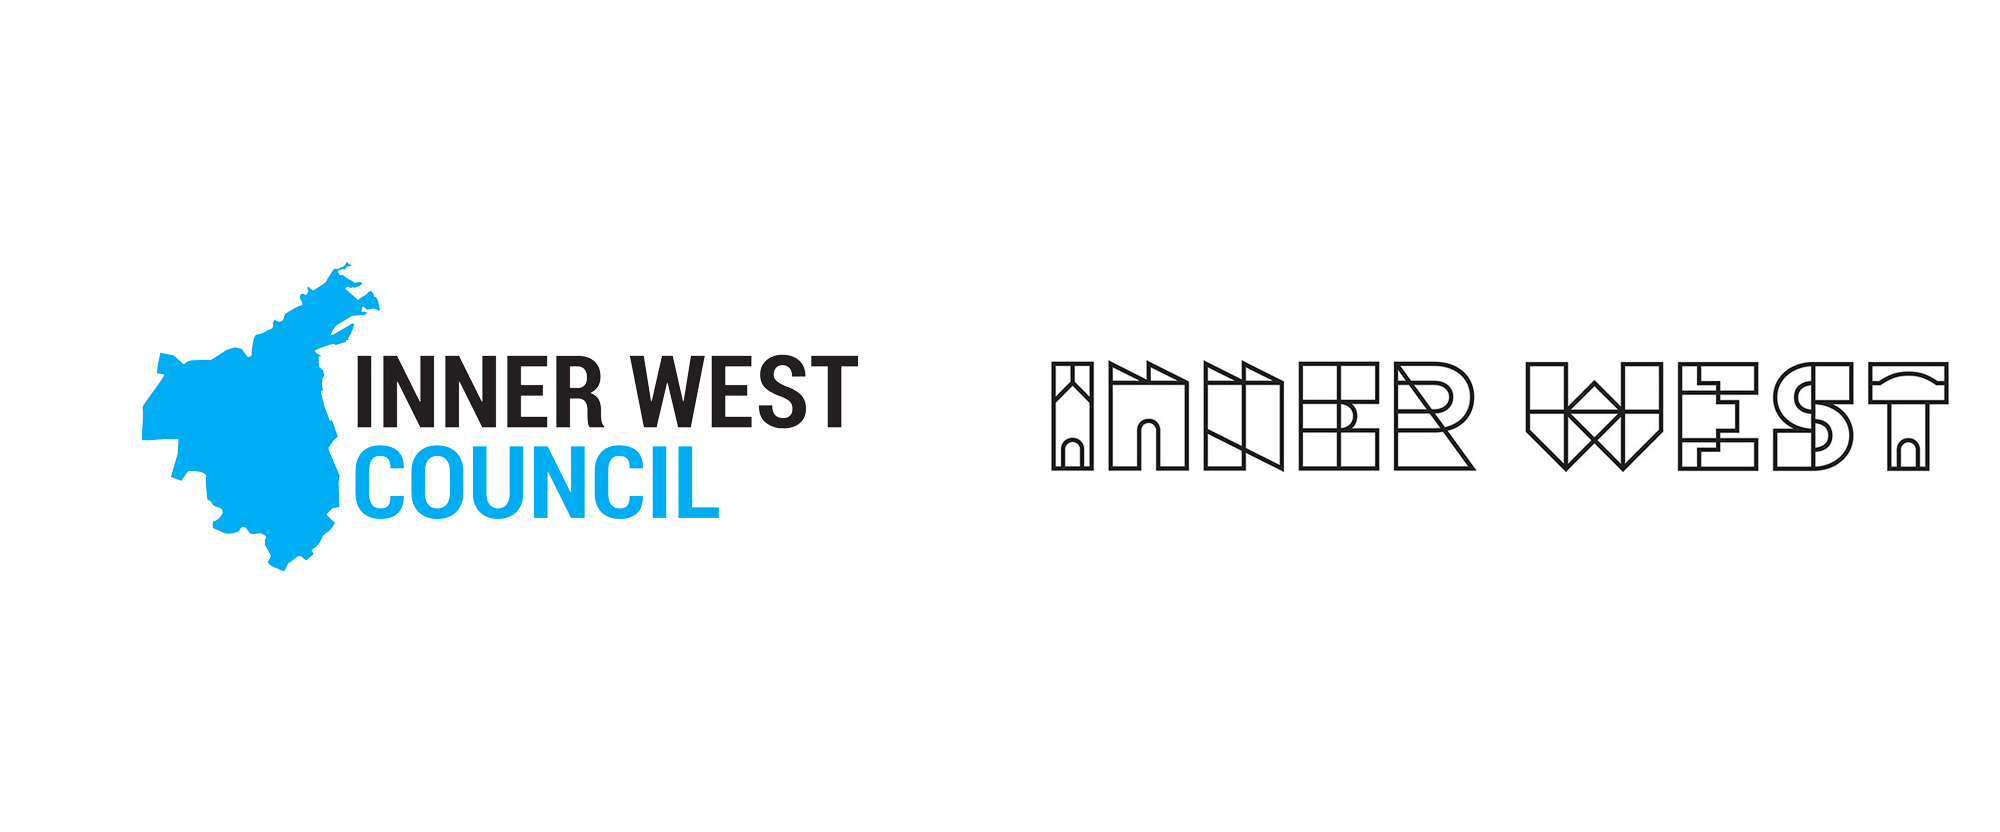 New Logo and Identity for Inner West Council by For The People